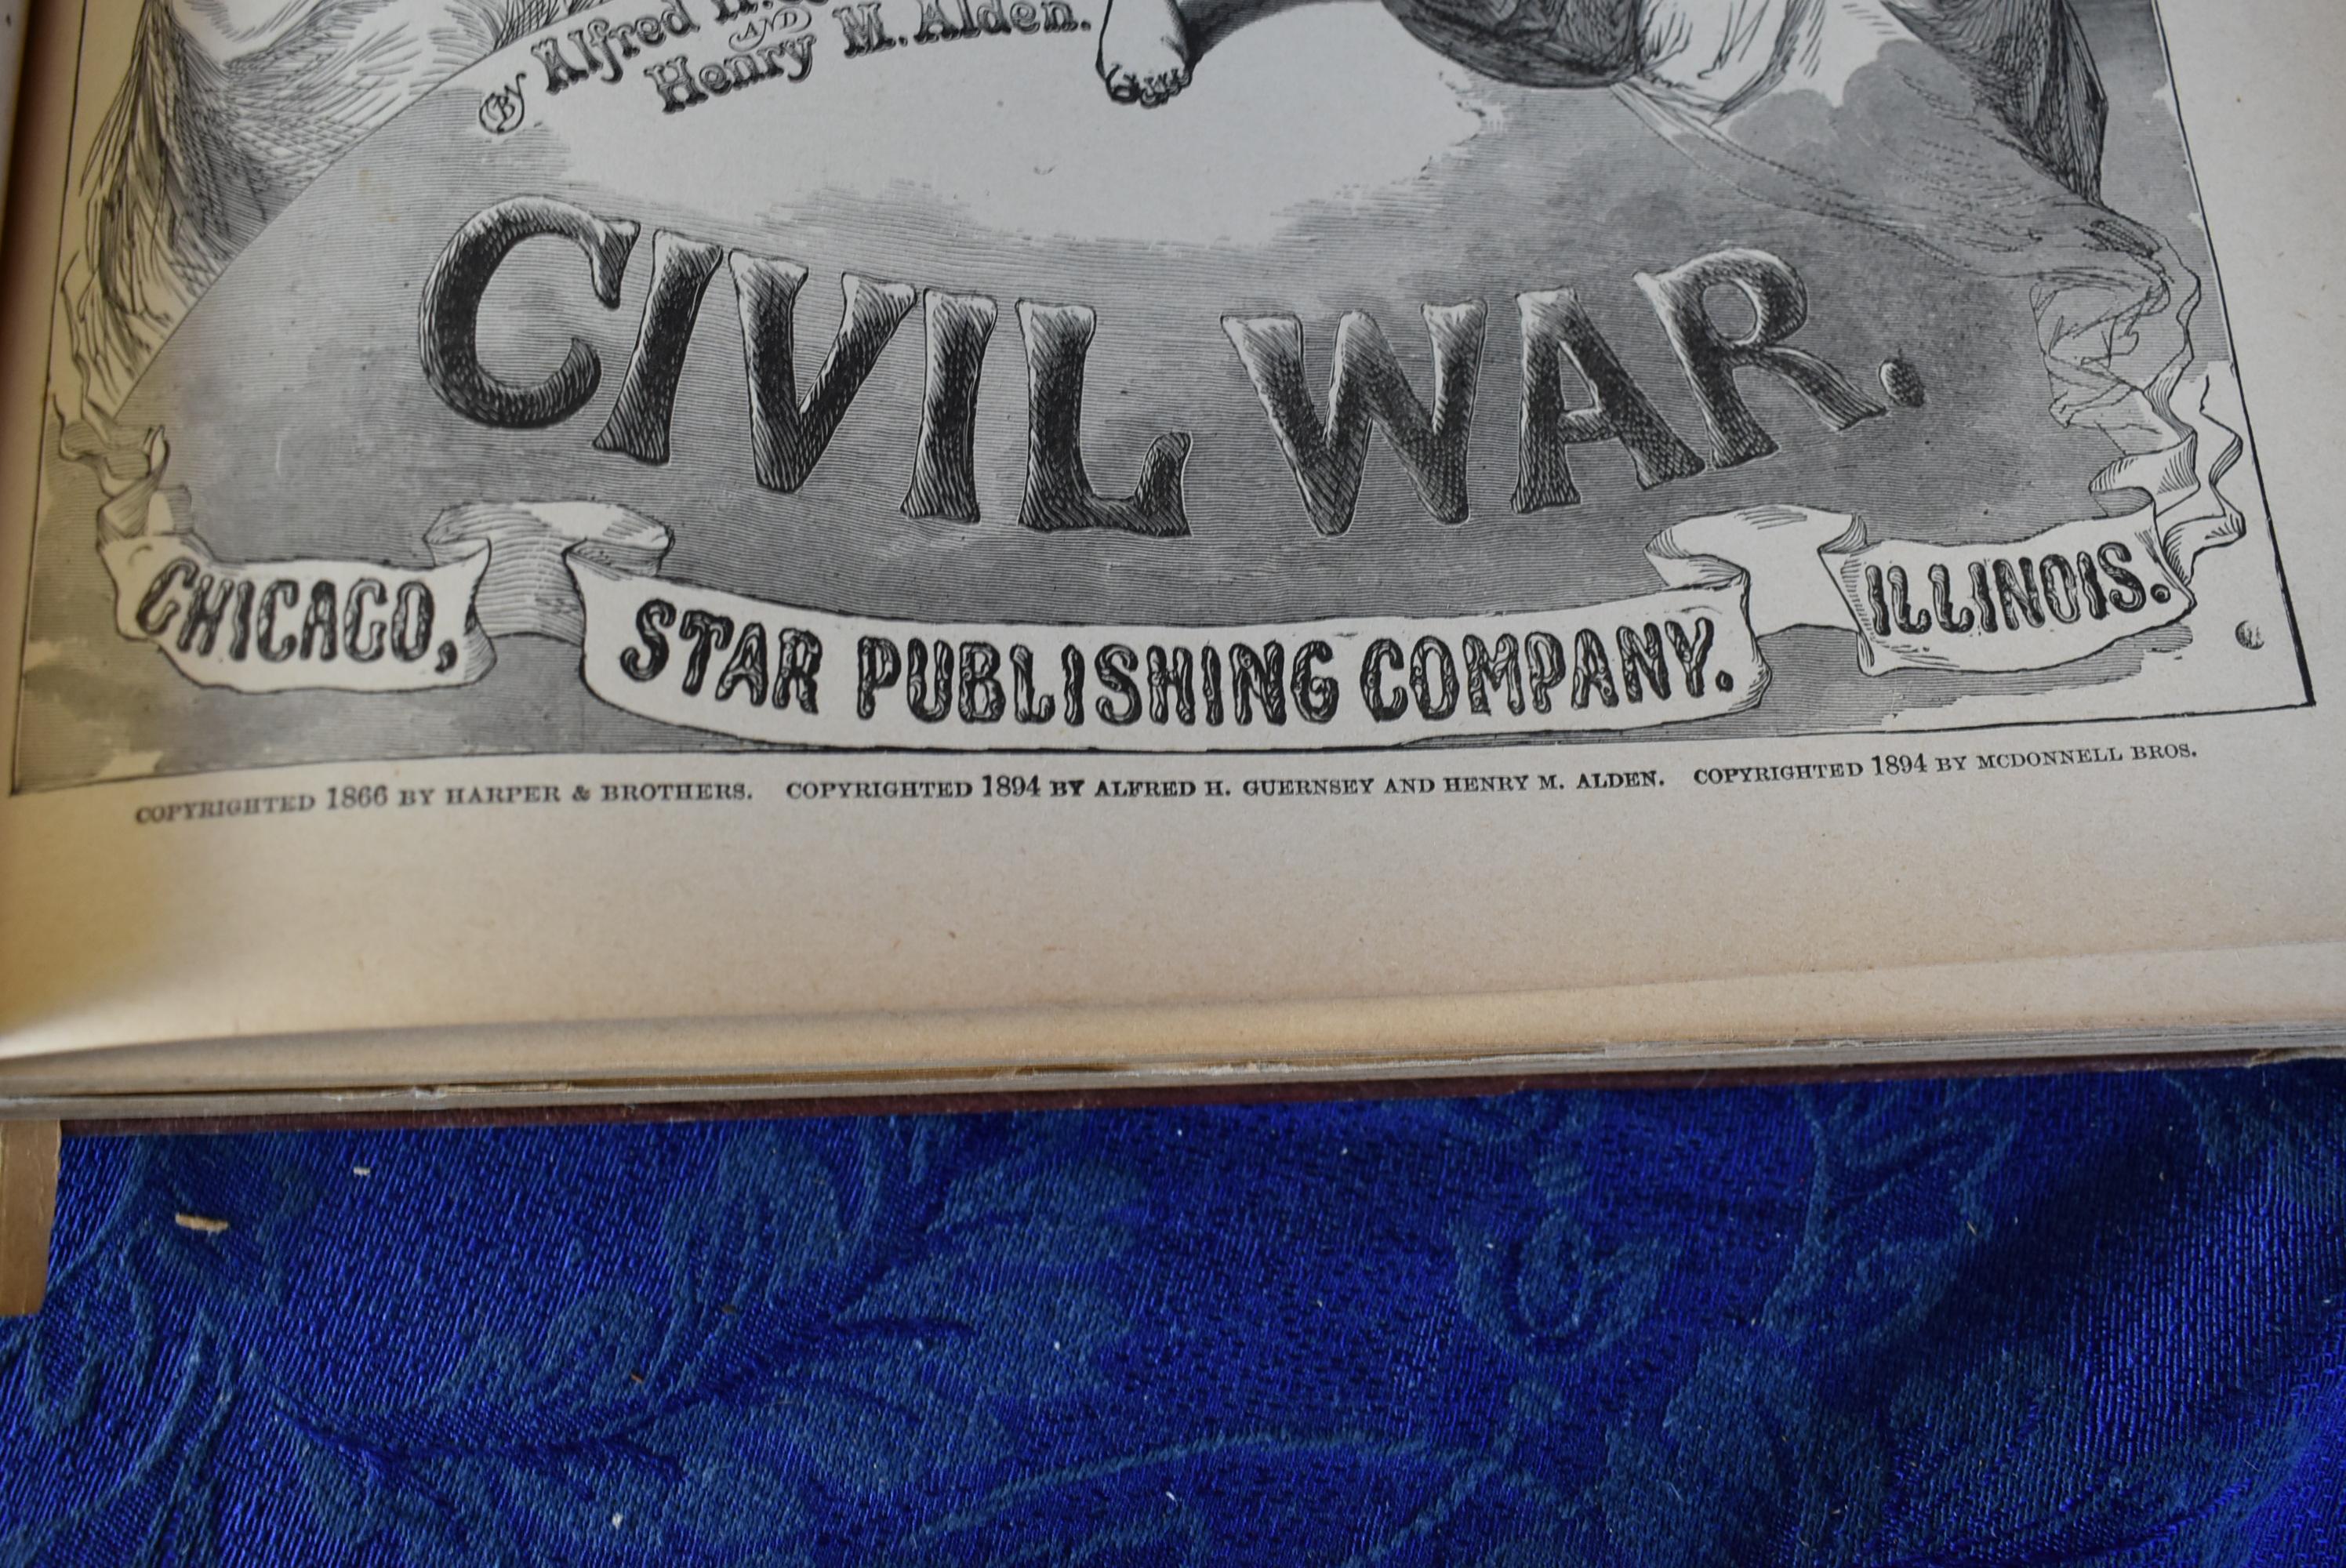 HARPER'S PICTORIAL HISTORY OF THE CIVIL WAR!